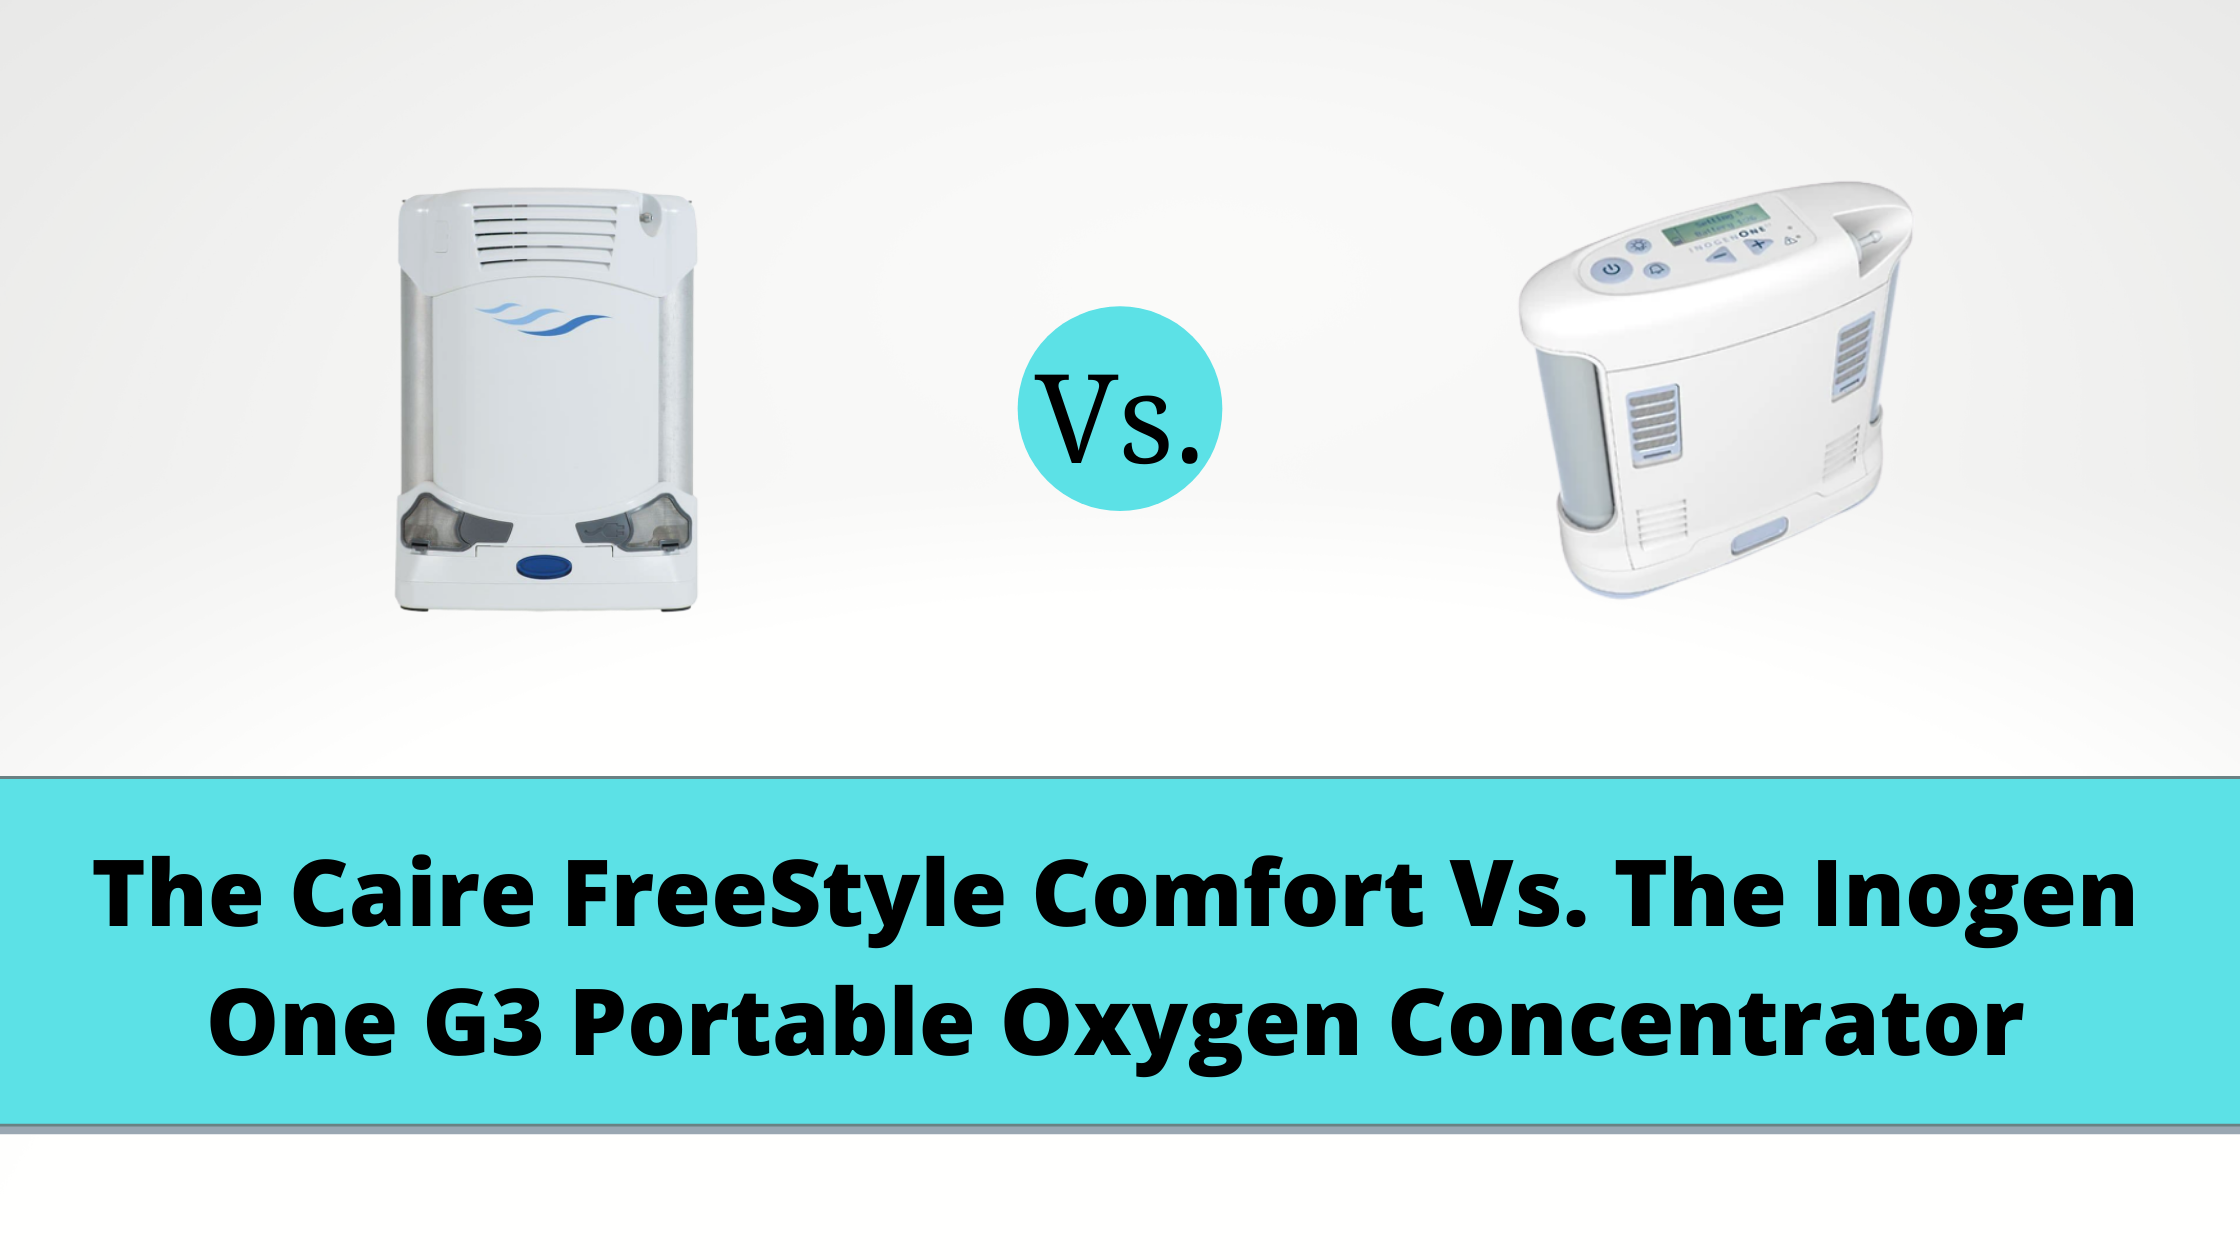 The Caire FreeStyle Comfort Vs. The Inogen One G3 Portable Oxygen Concentrator